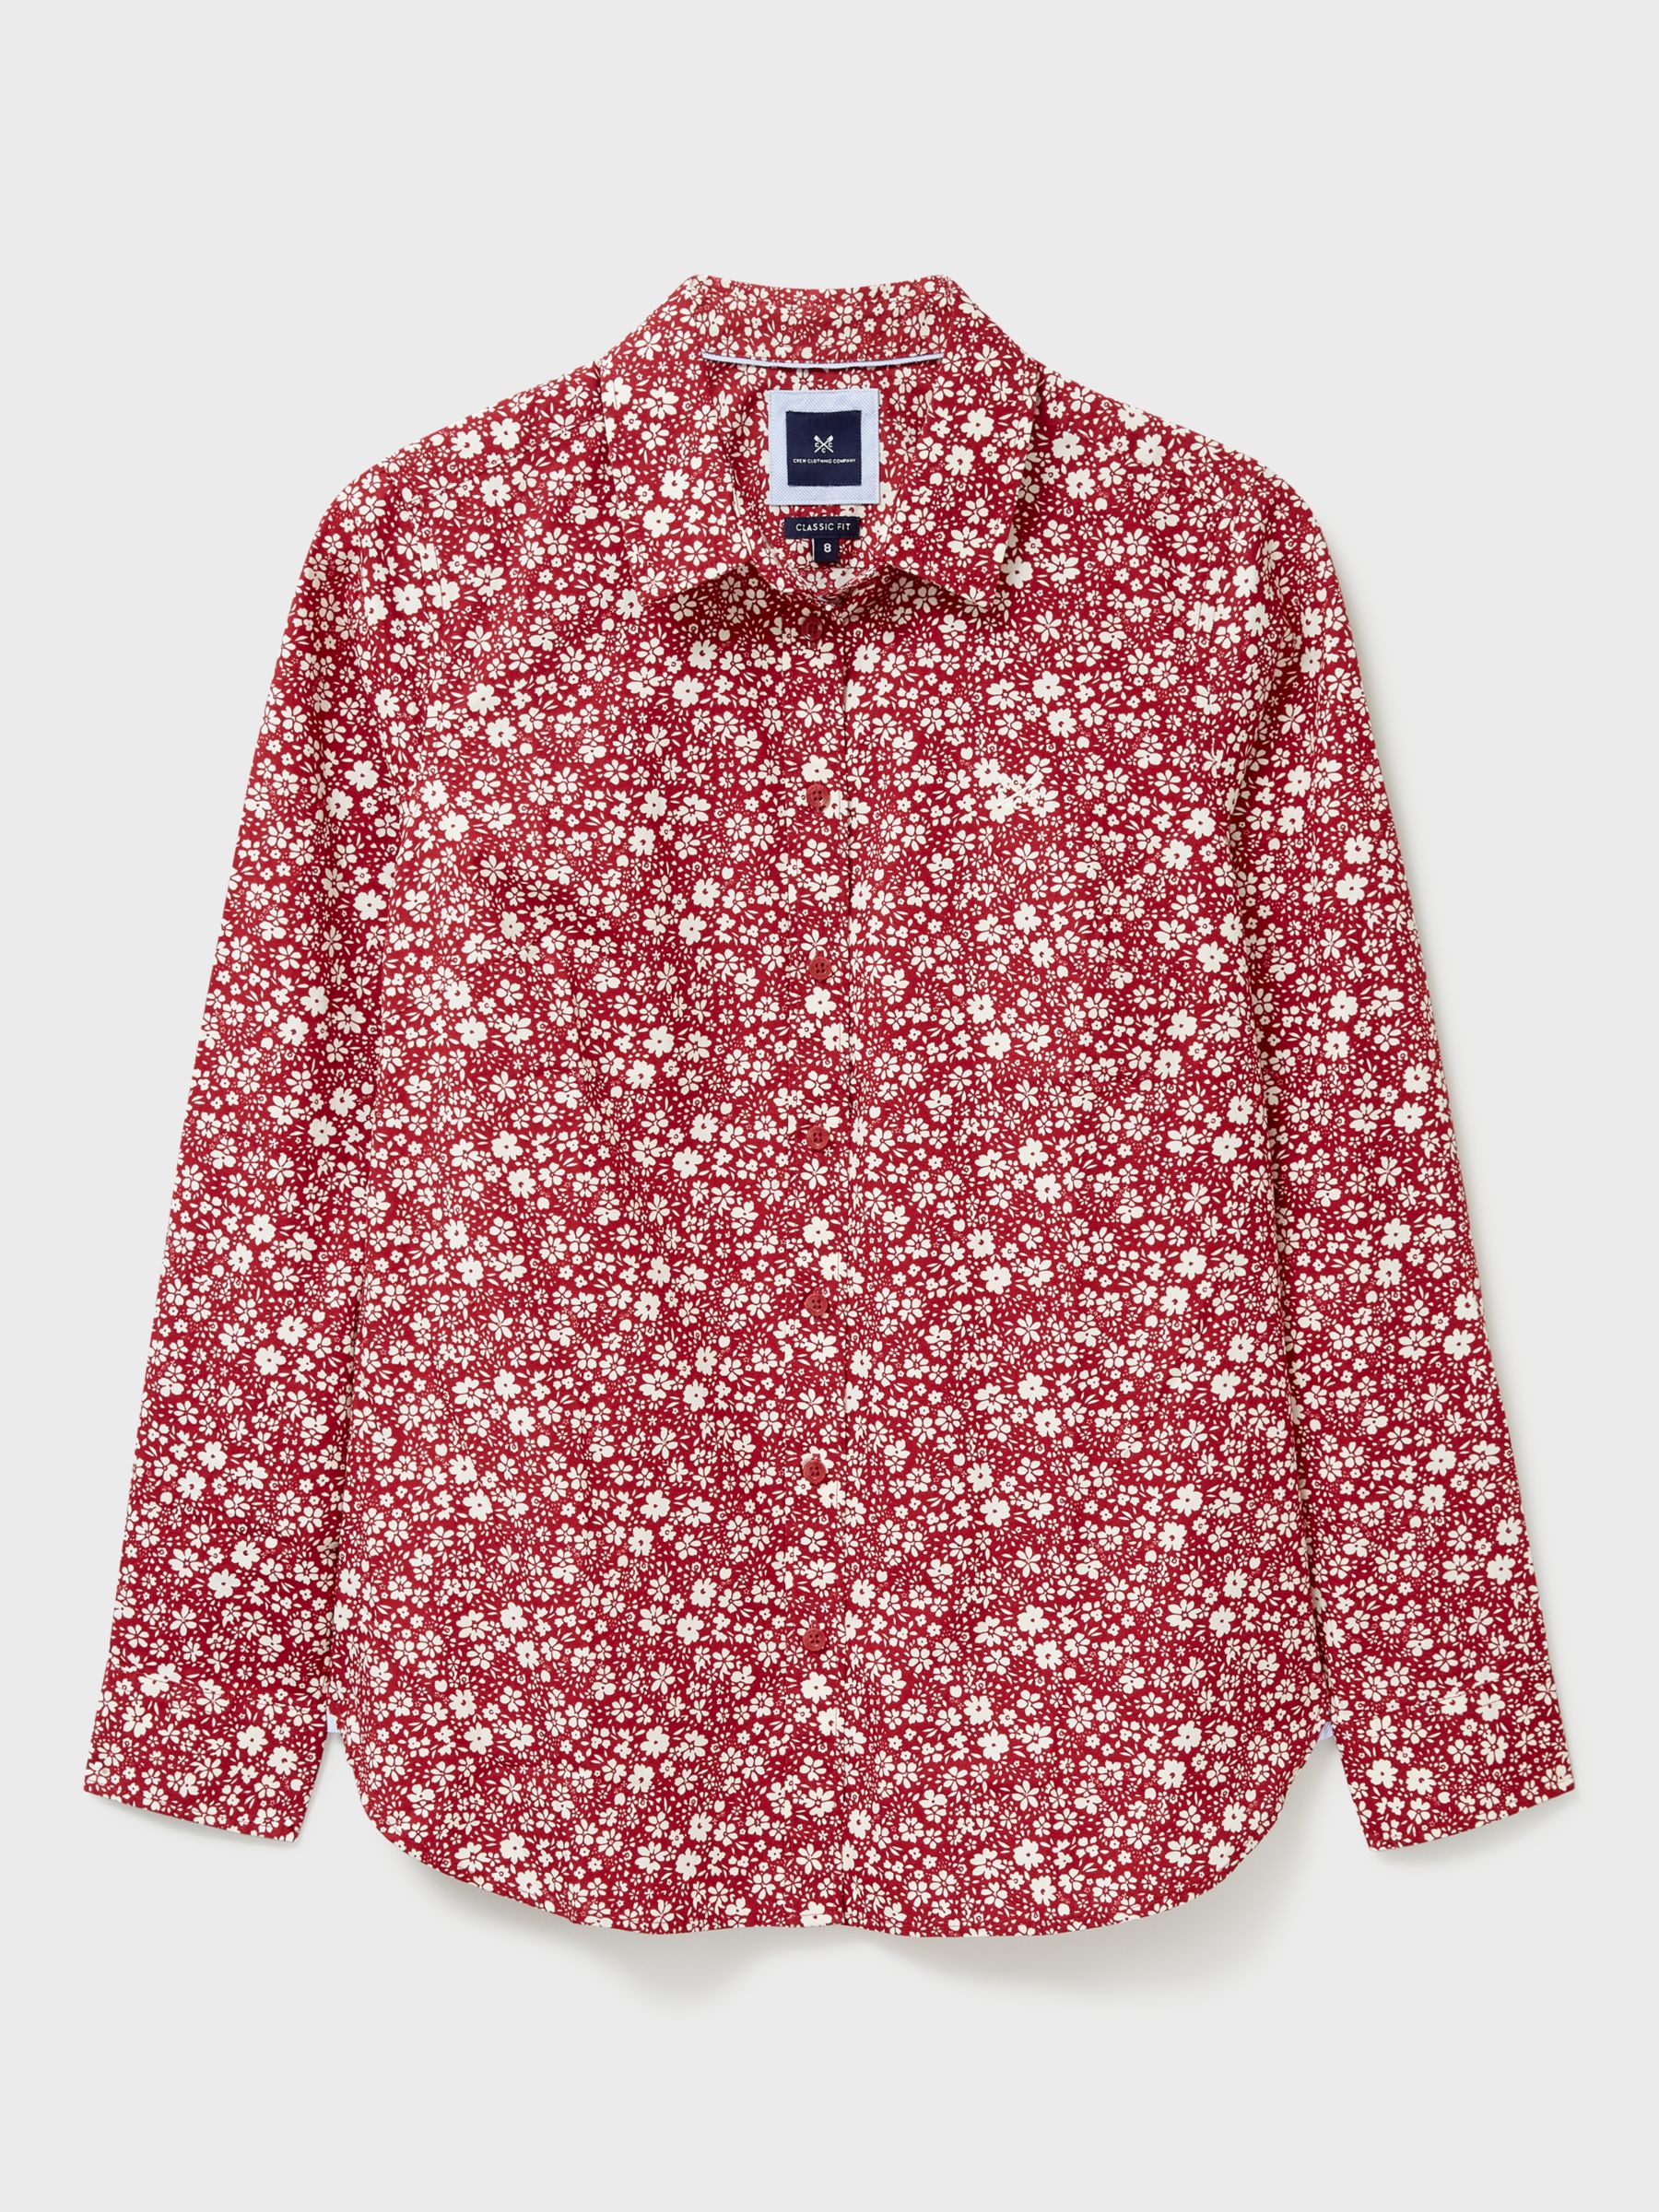 Crew Clothing Lulworth Shirt, Berry Red at John Lewis & Partners